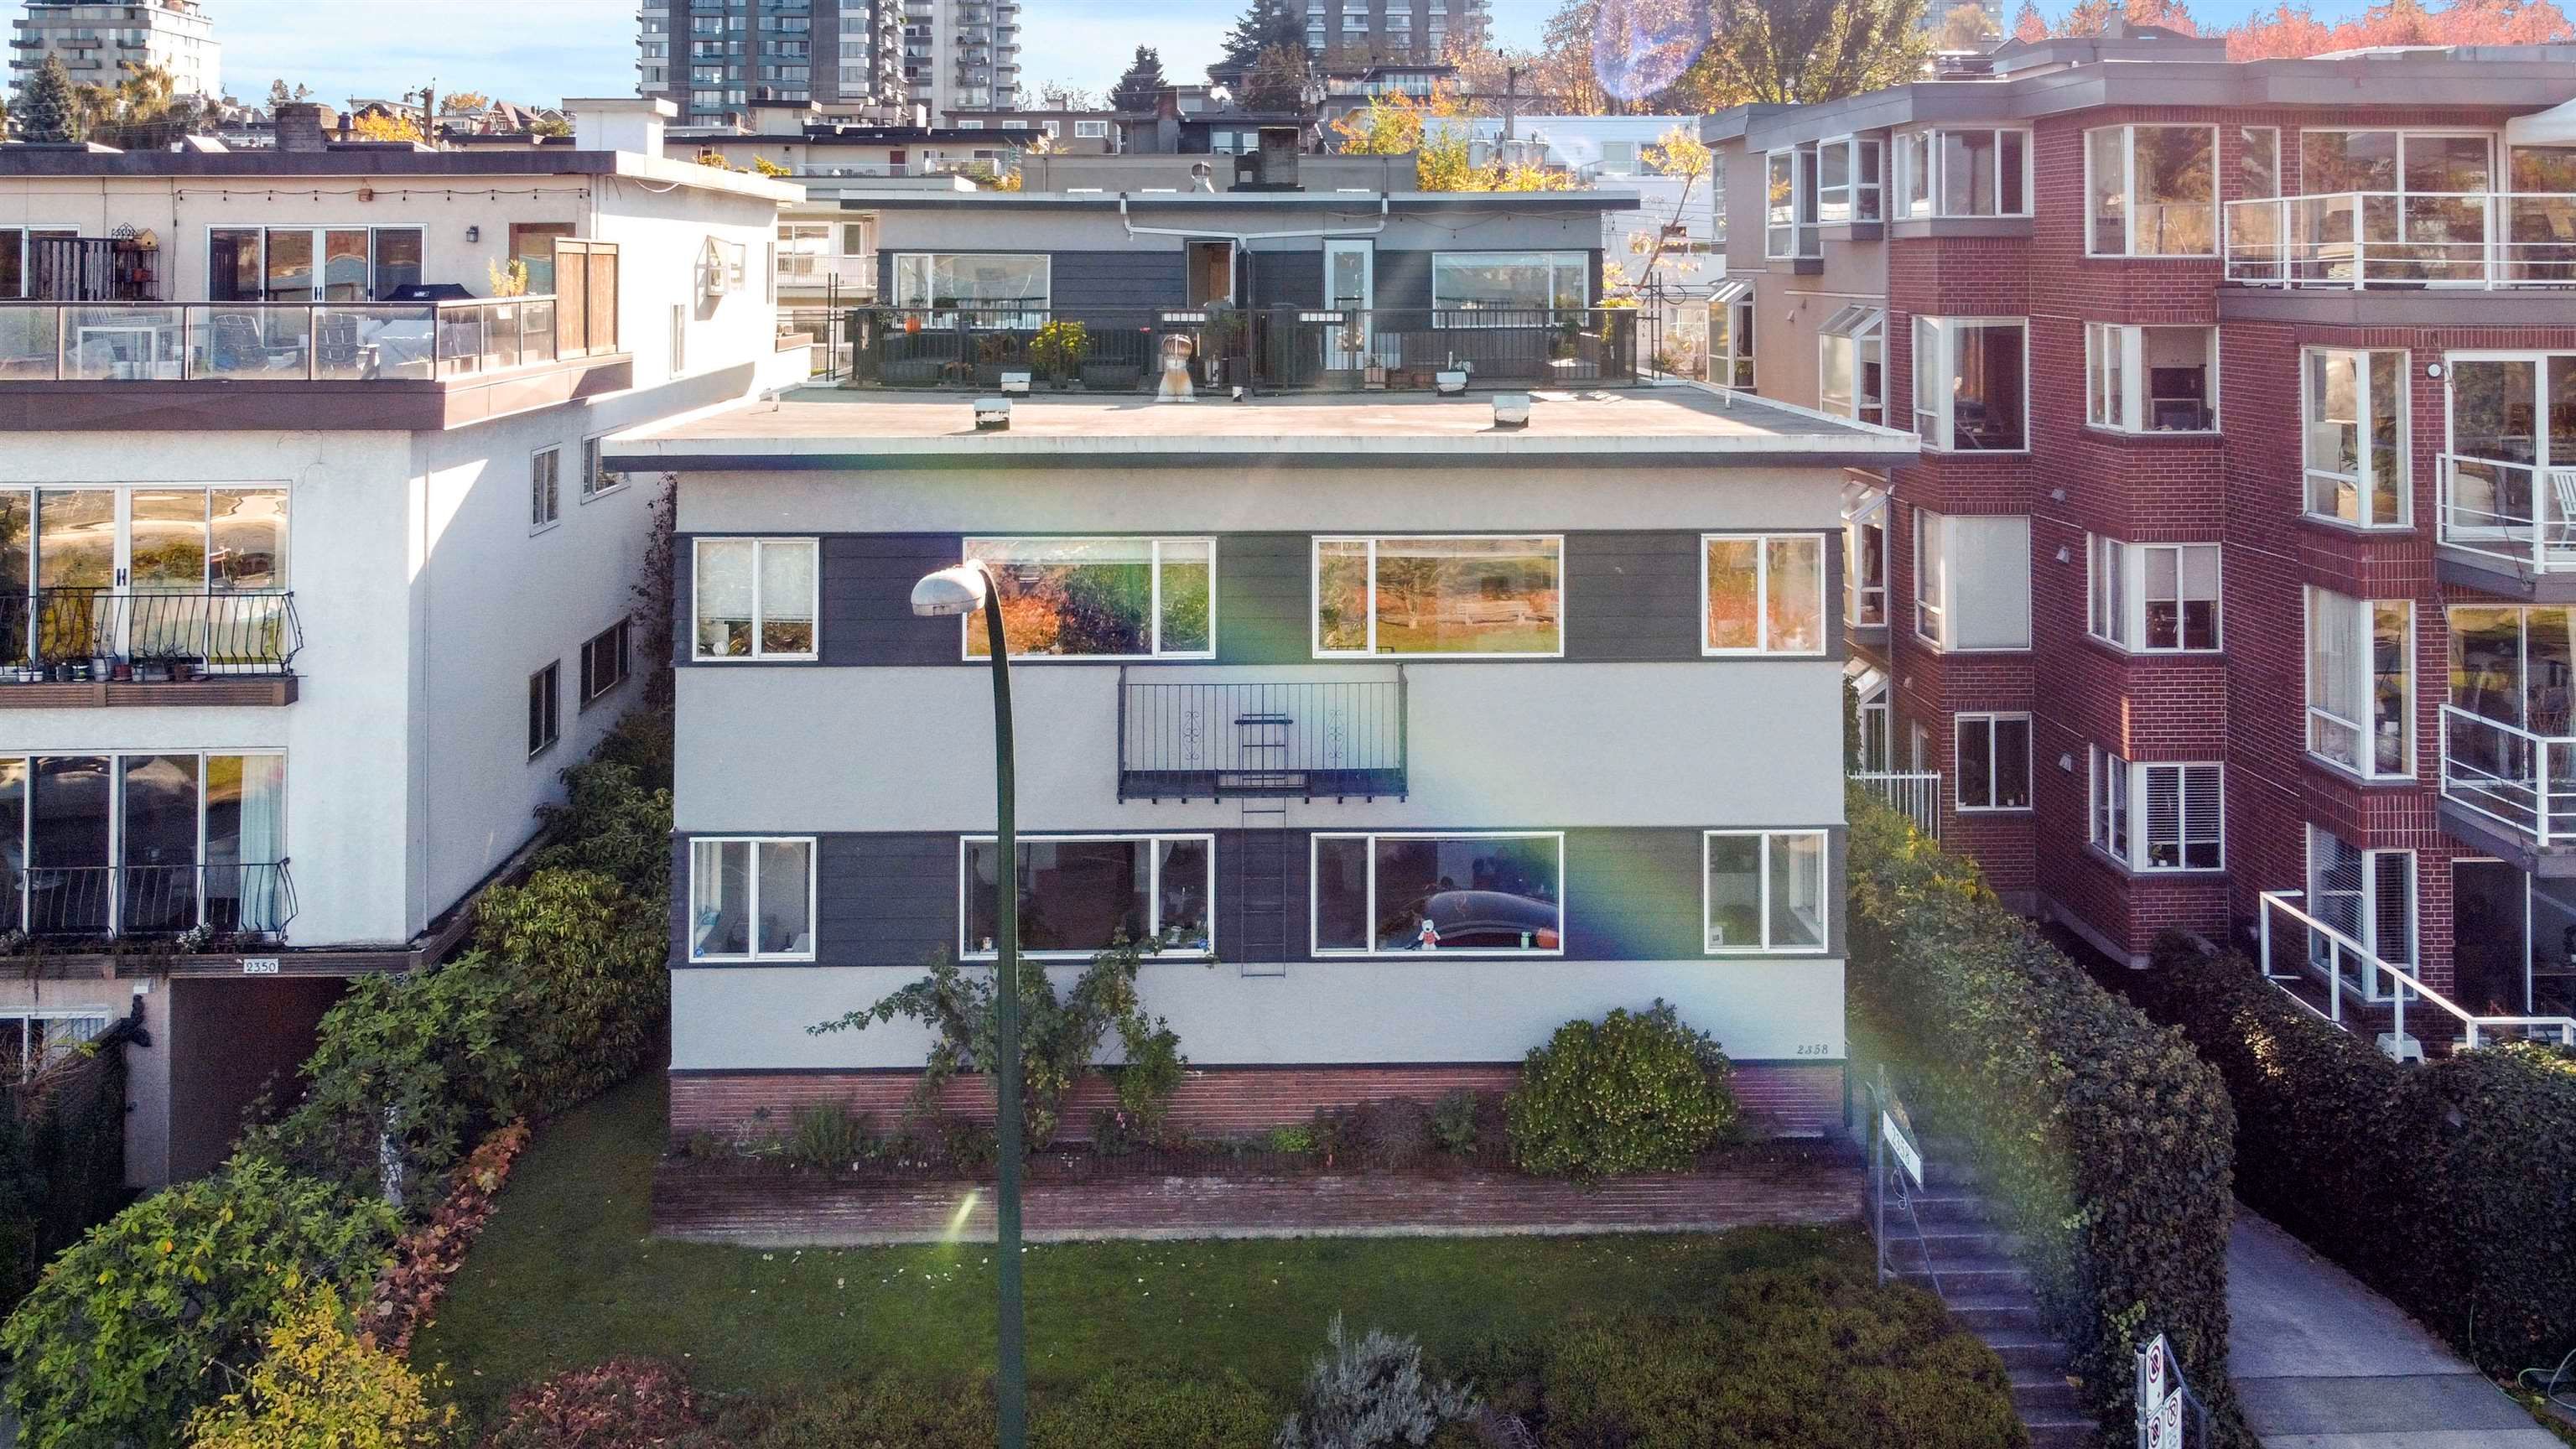 Main Photo: 2358 CORNWALL Avenue in Vancouver: Kitsilano Multi-Family Commercial for sale (Vancouver West)  : MLS®# C8041022